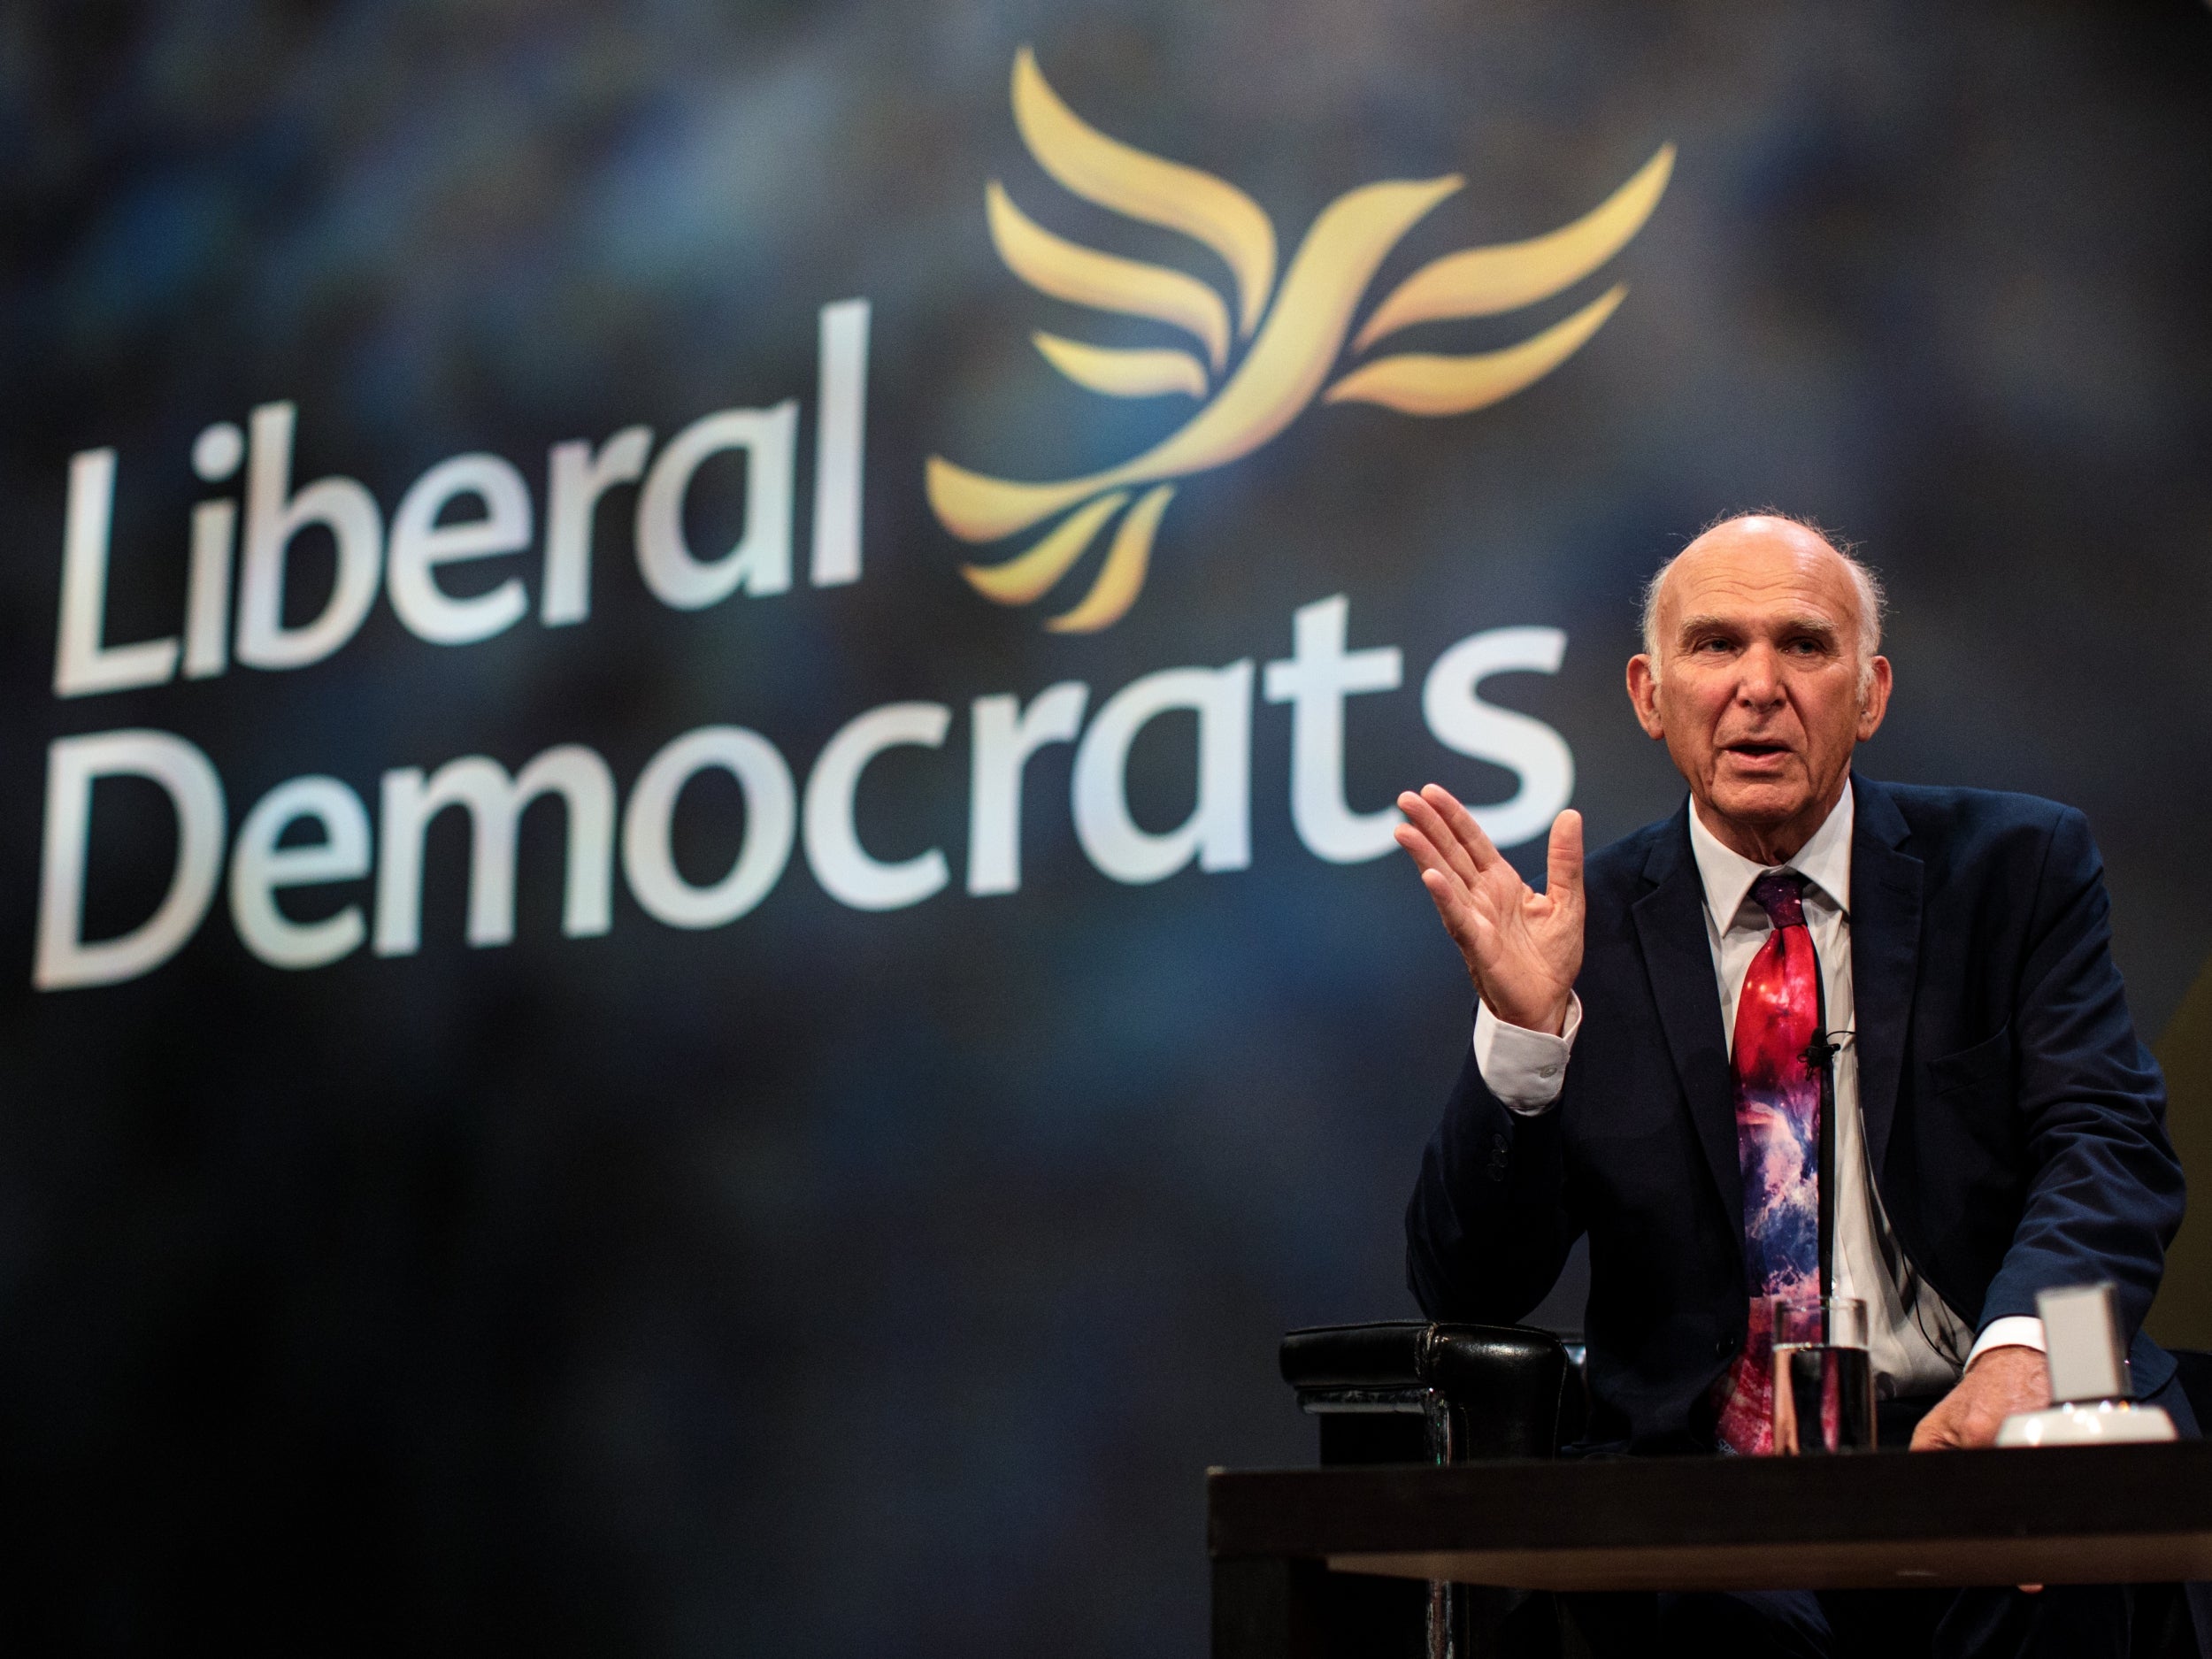 Sir Vince Cable addresses the Lib Dem conference in Brighton